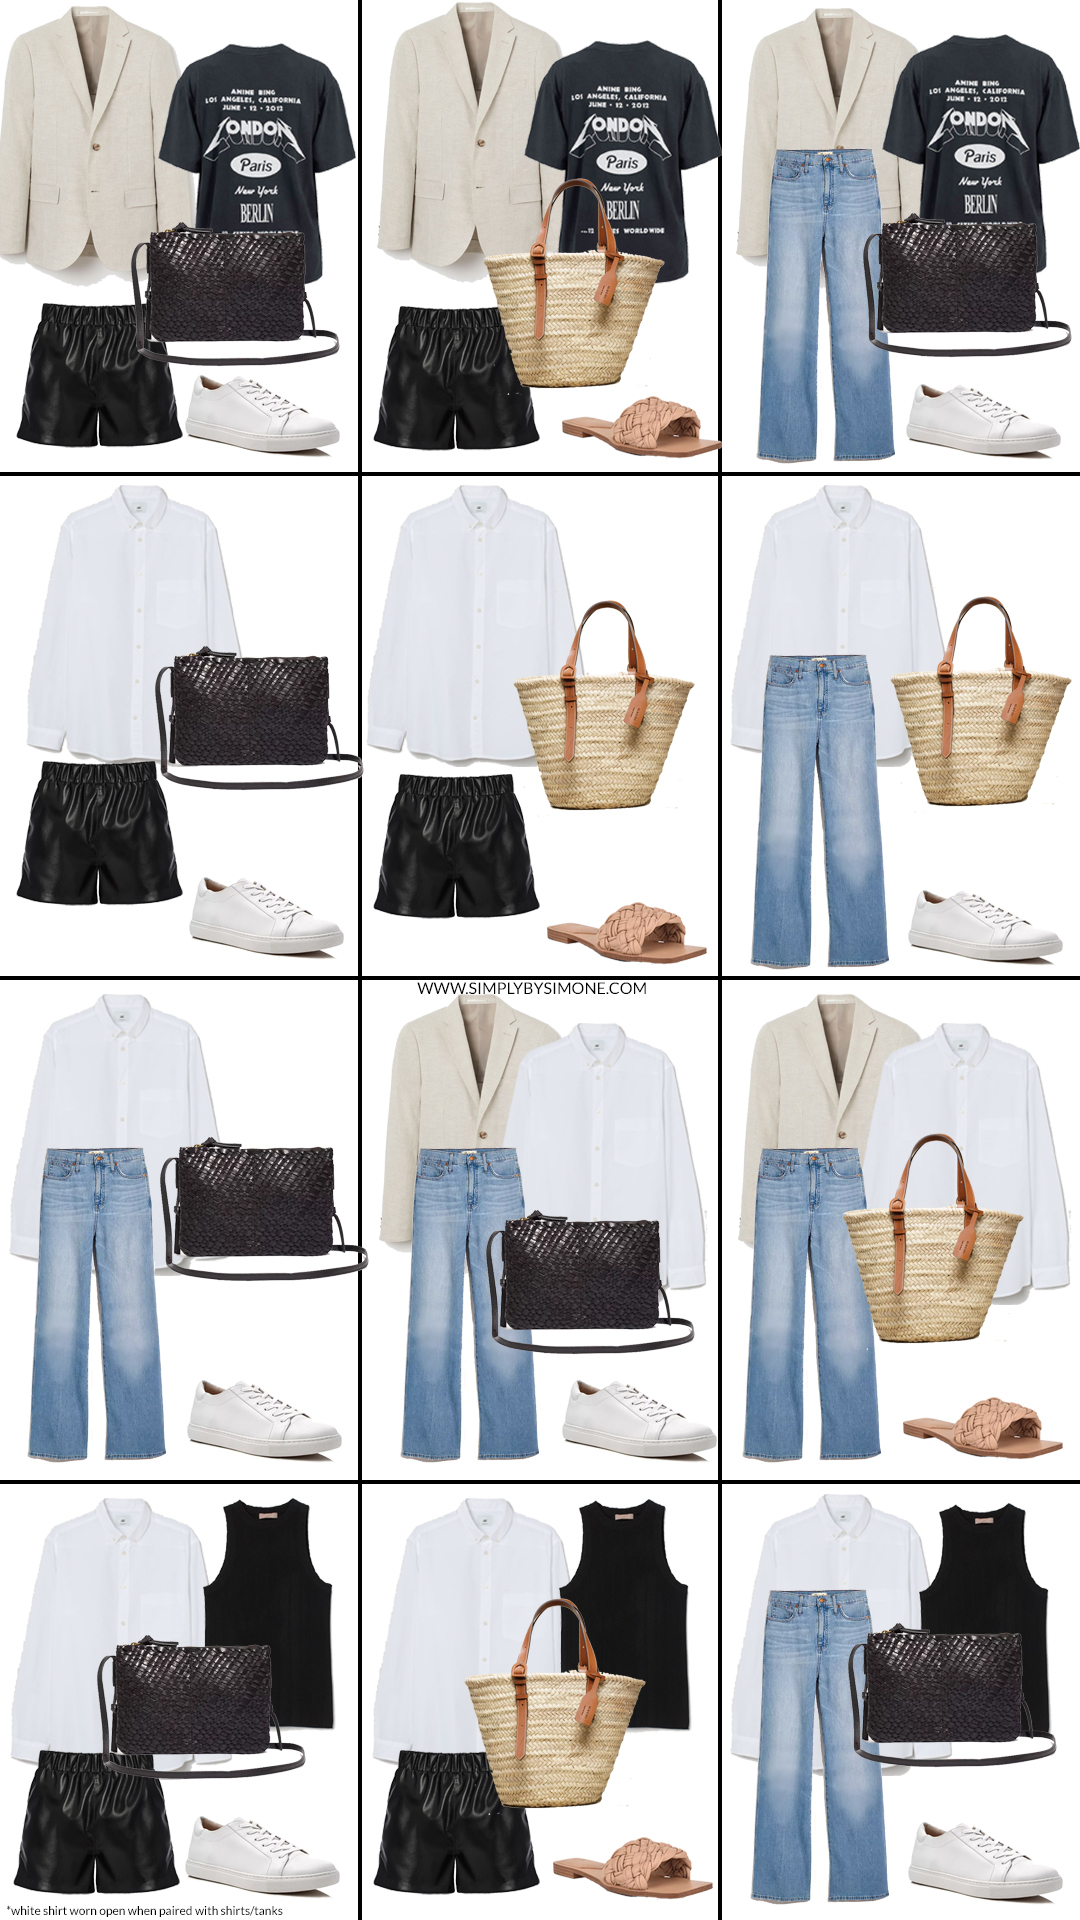 Summer Capsule Wardrobe - 11 Items 36 Outfit Ideas for Summer - Looks 13-24